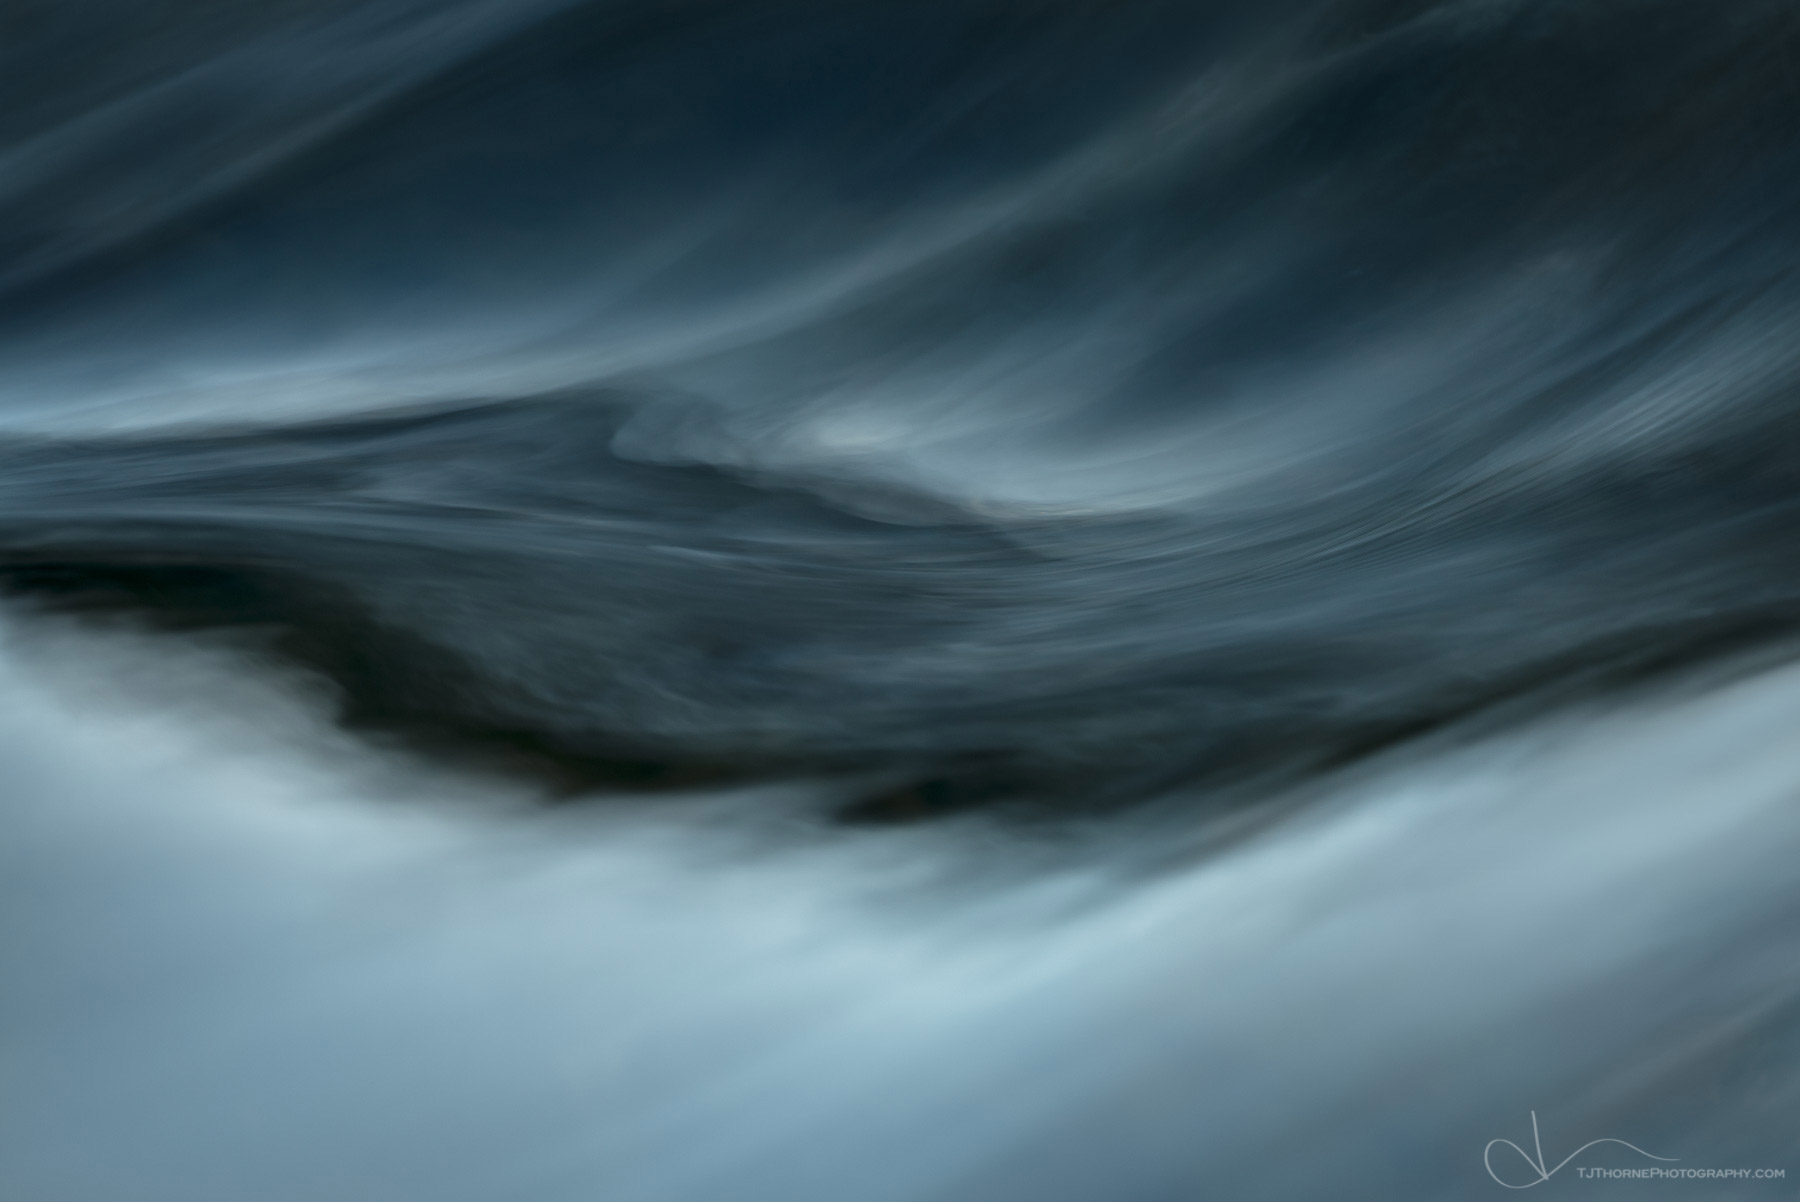 Landscape, abstract, blue, flow, liquid, long exposure, nature, river, smoke, stream, tj thorne, water, wave, wet